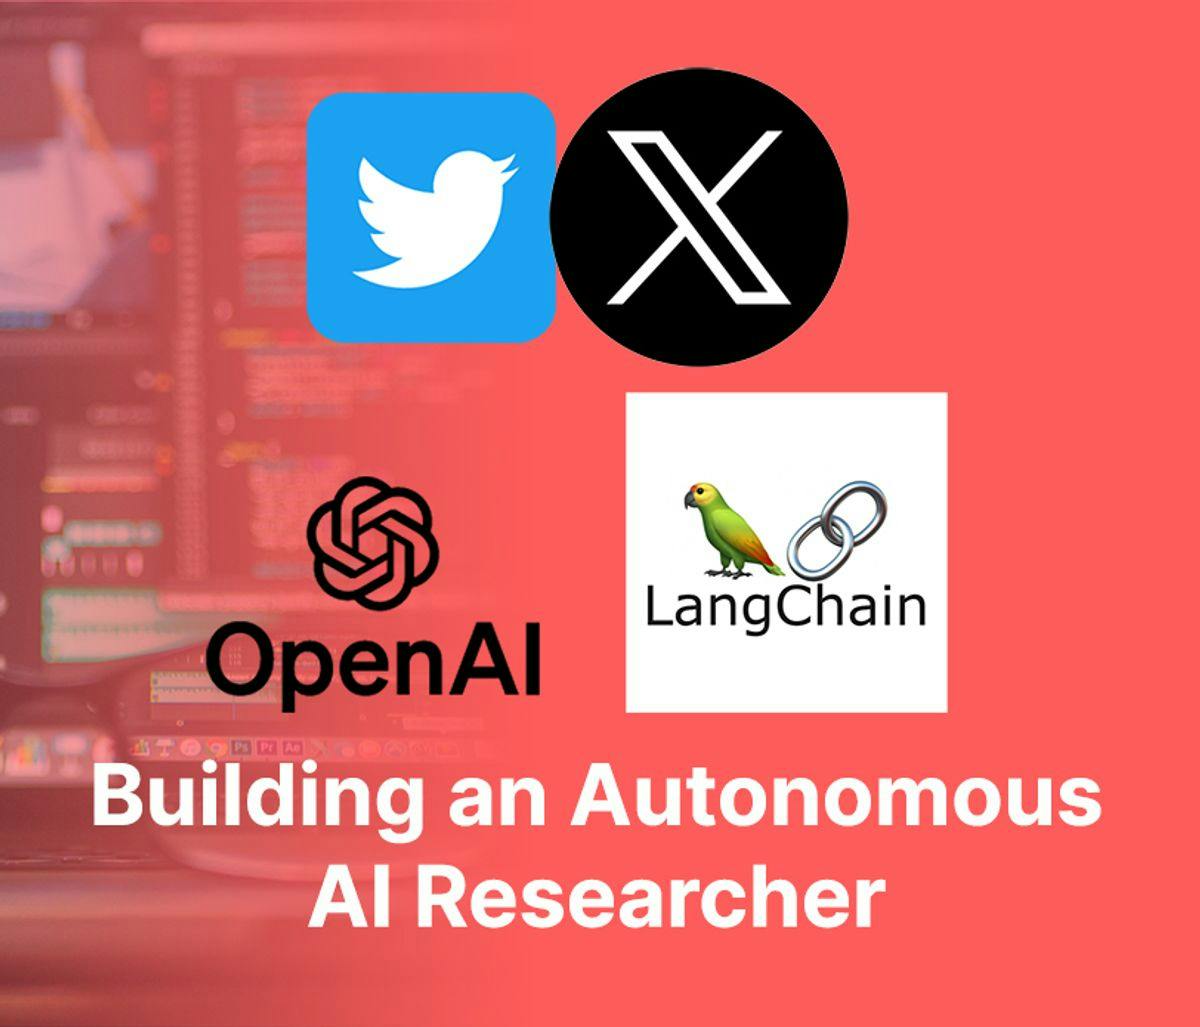 Cover Photo with twitter logos open AI logo and langchain logo along with glasses and laptop in background